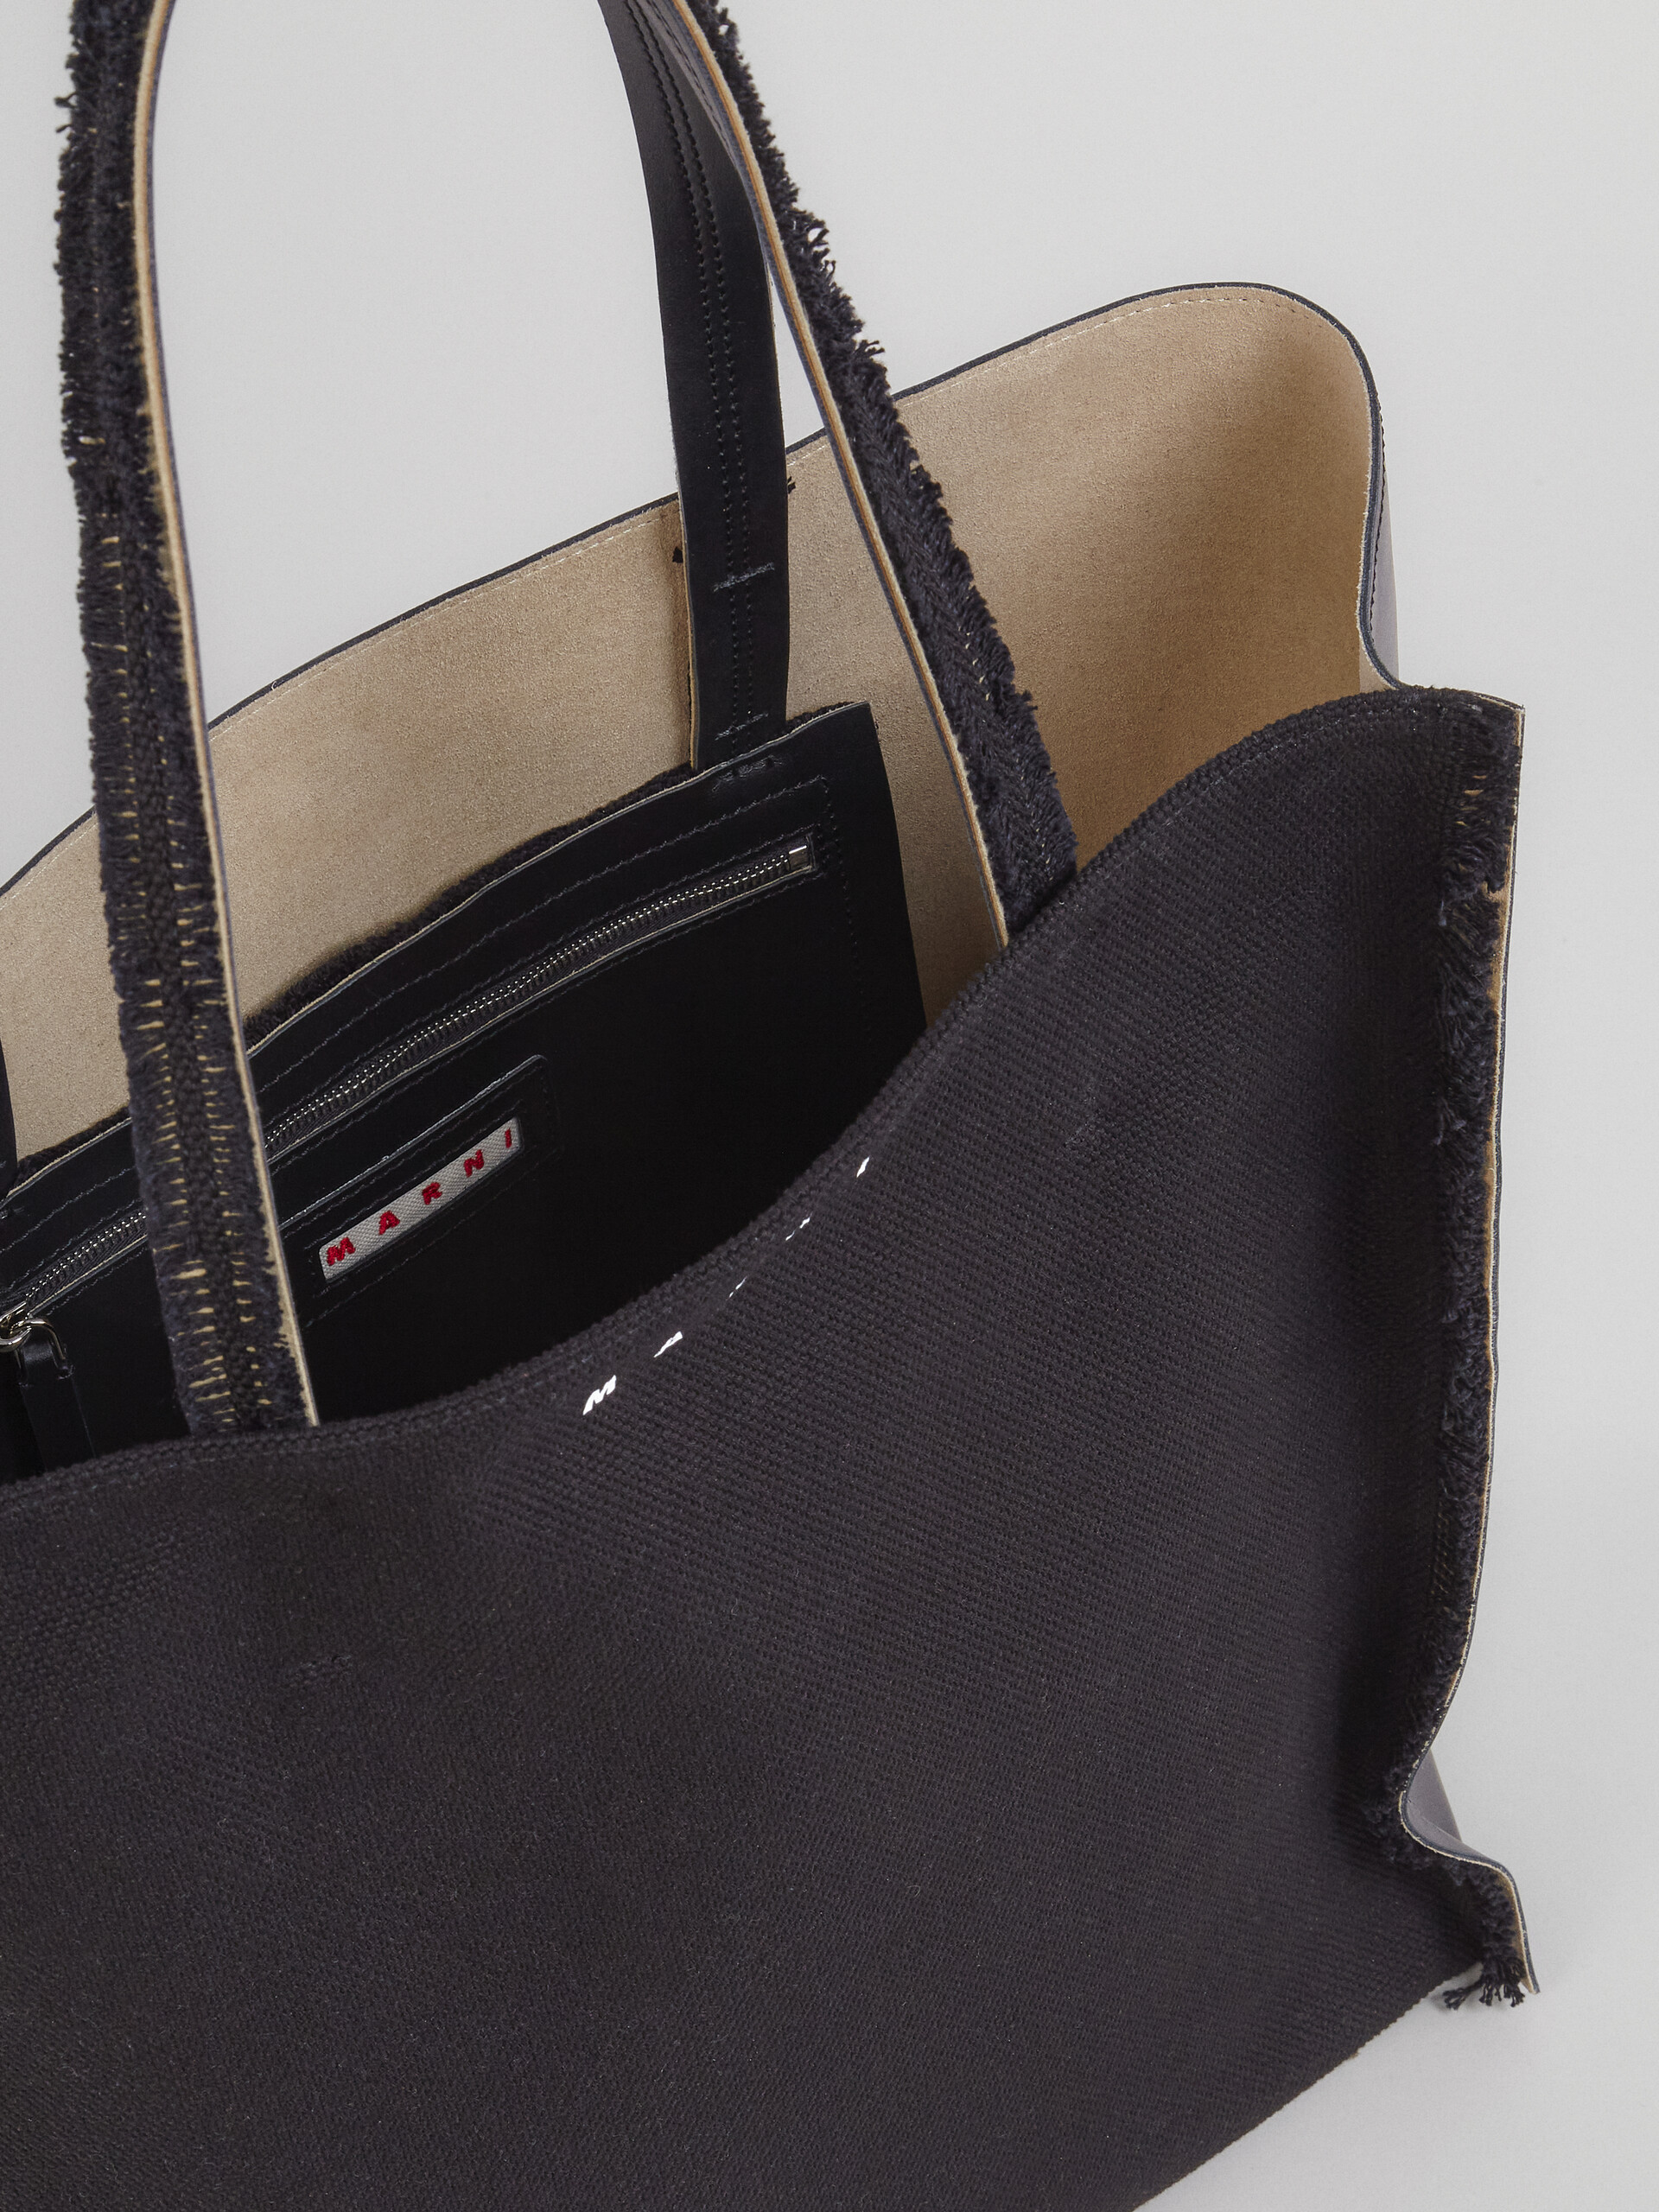 Black leather and canvas MUSEO SOFT shopping bag - Shopping Bags - Image 4